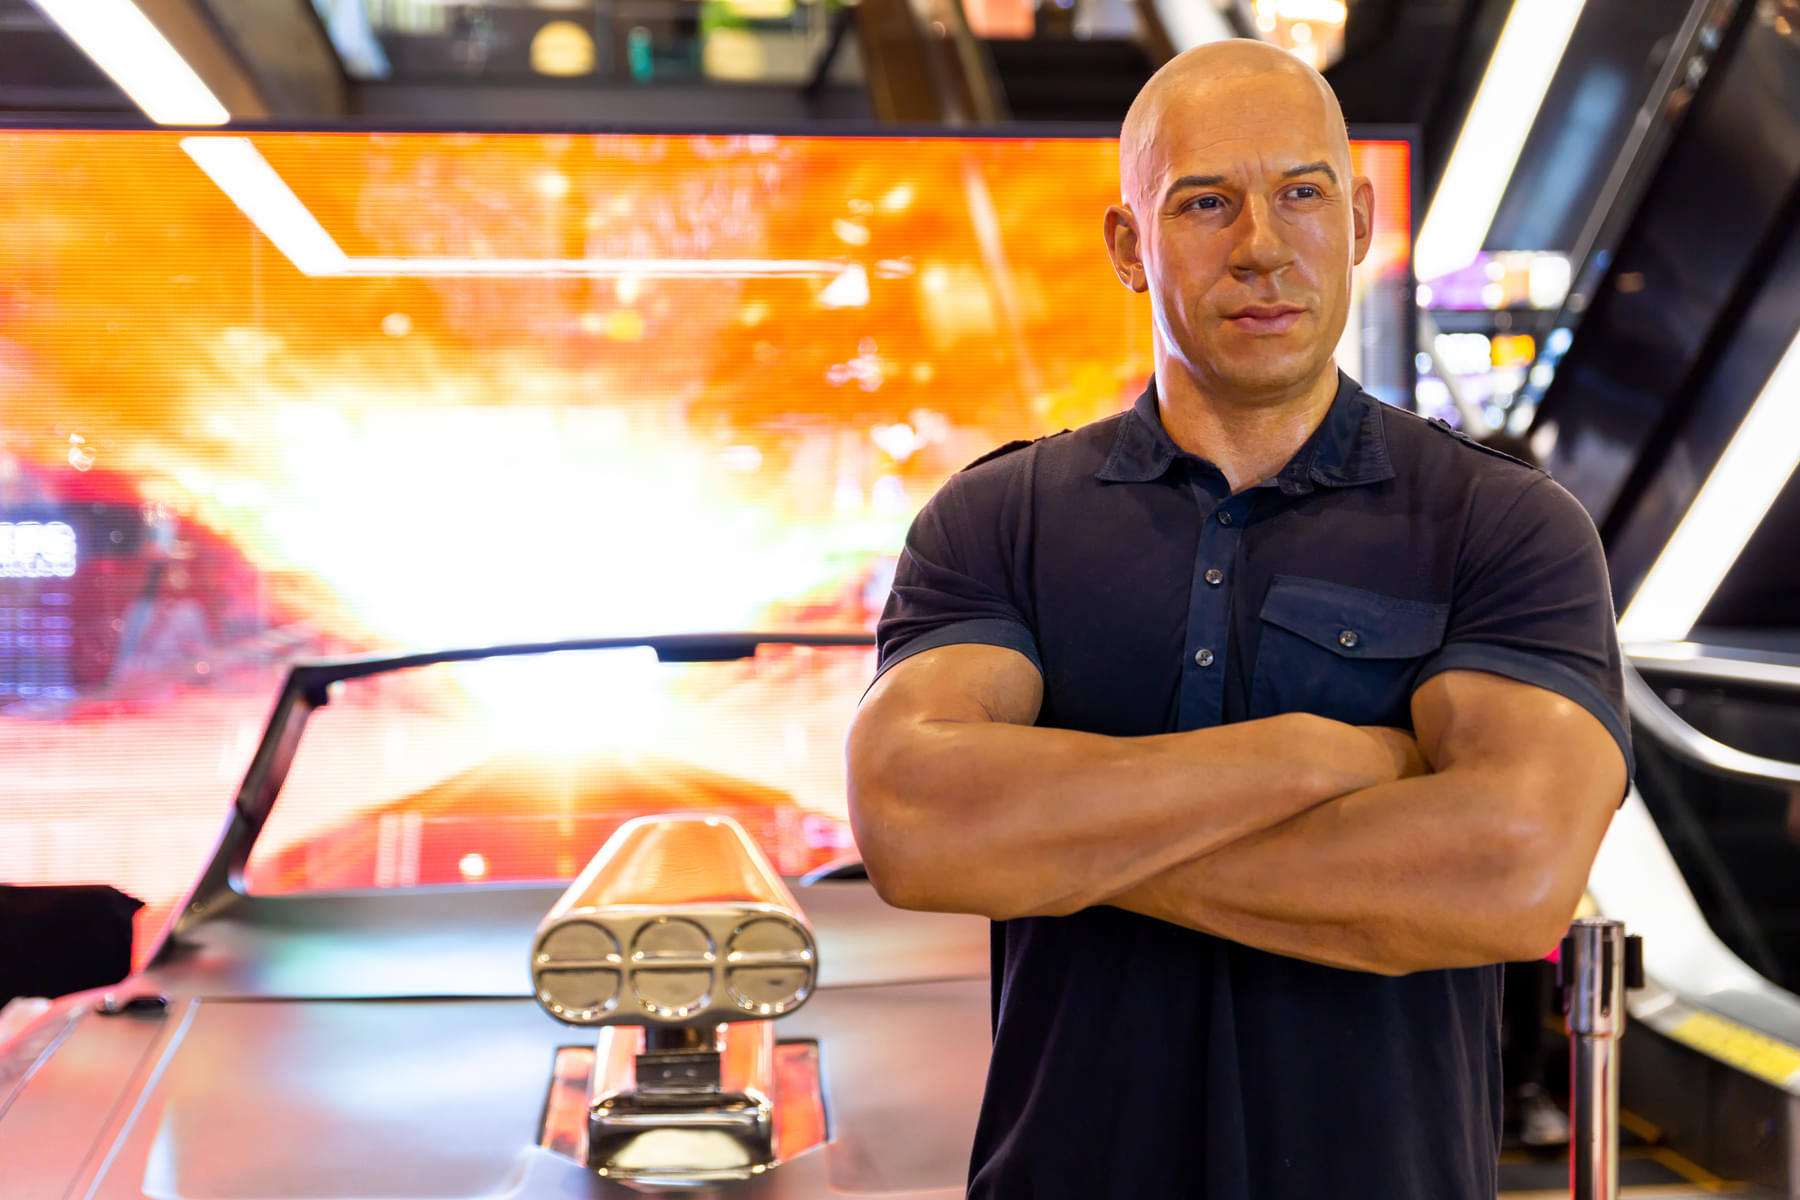 Fast & Furious fans should not miss getting clicked with Vin Diesel